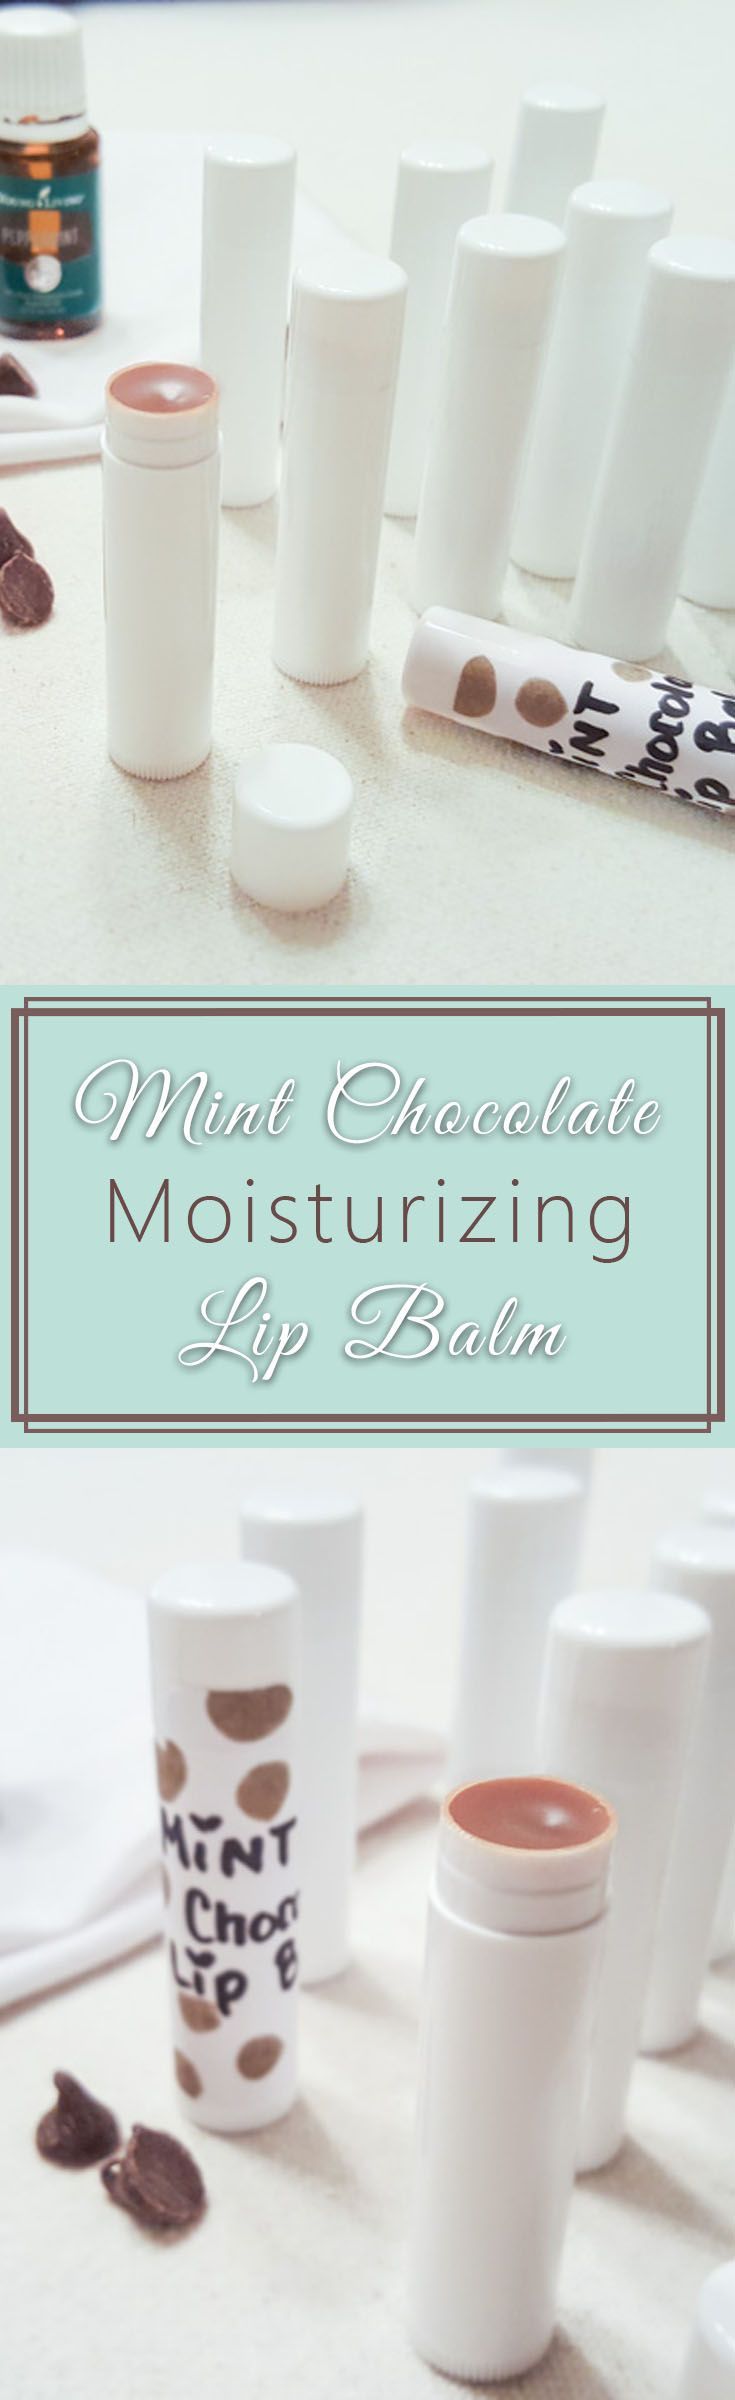 Mint Chocolate Moisturizing Lip Balm is a cinch to make and such a fun personali...